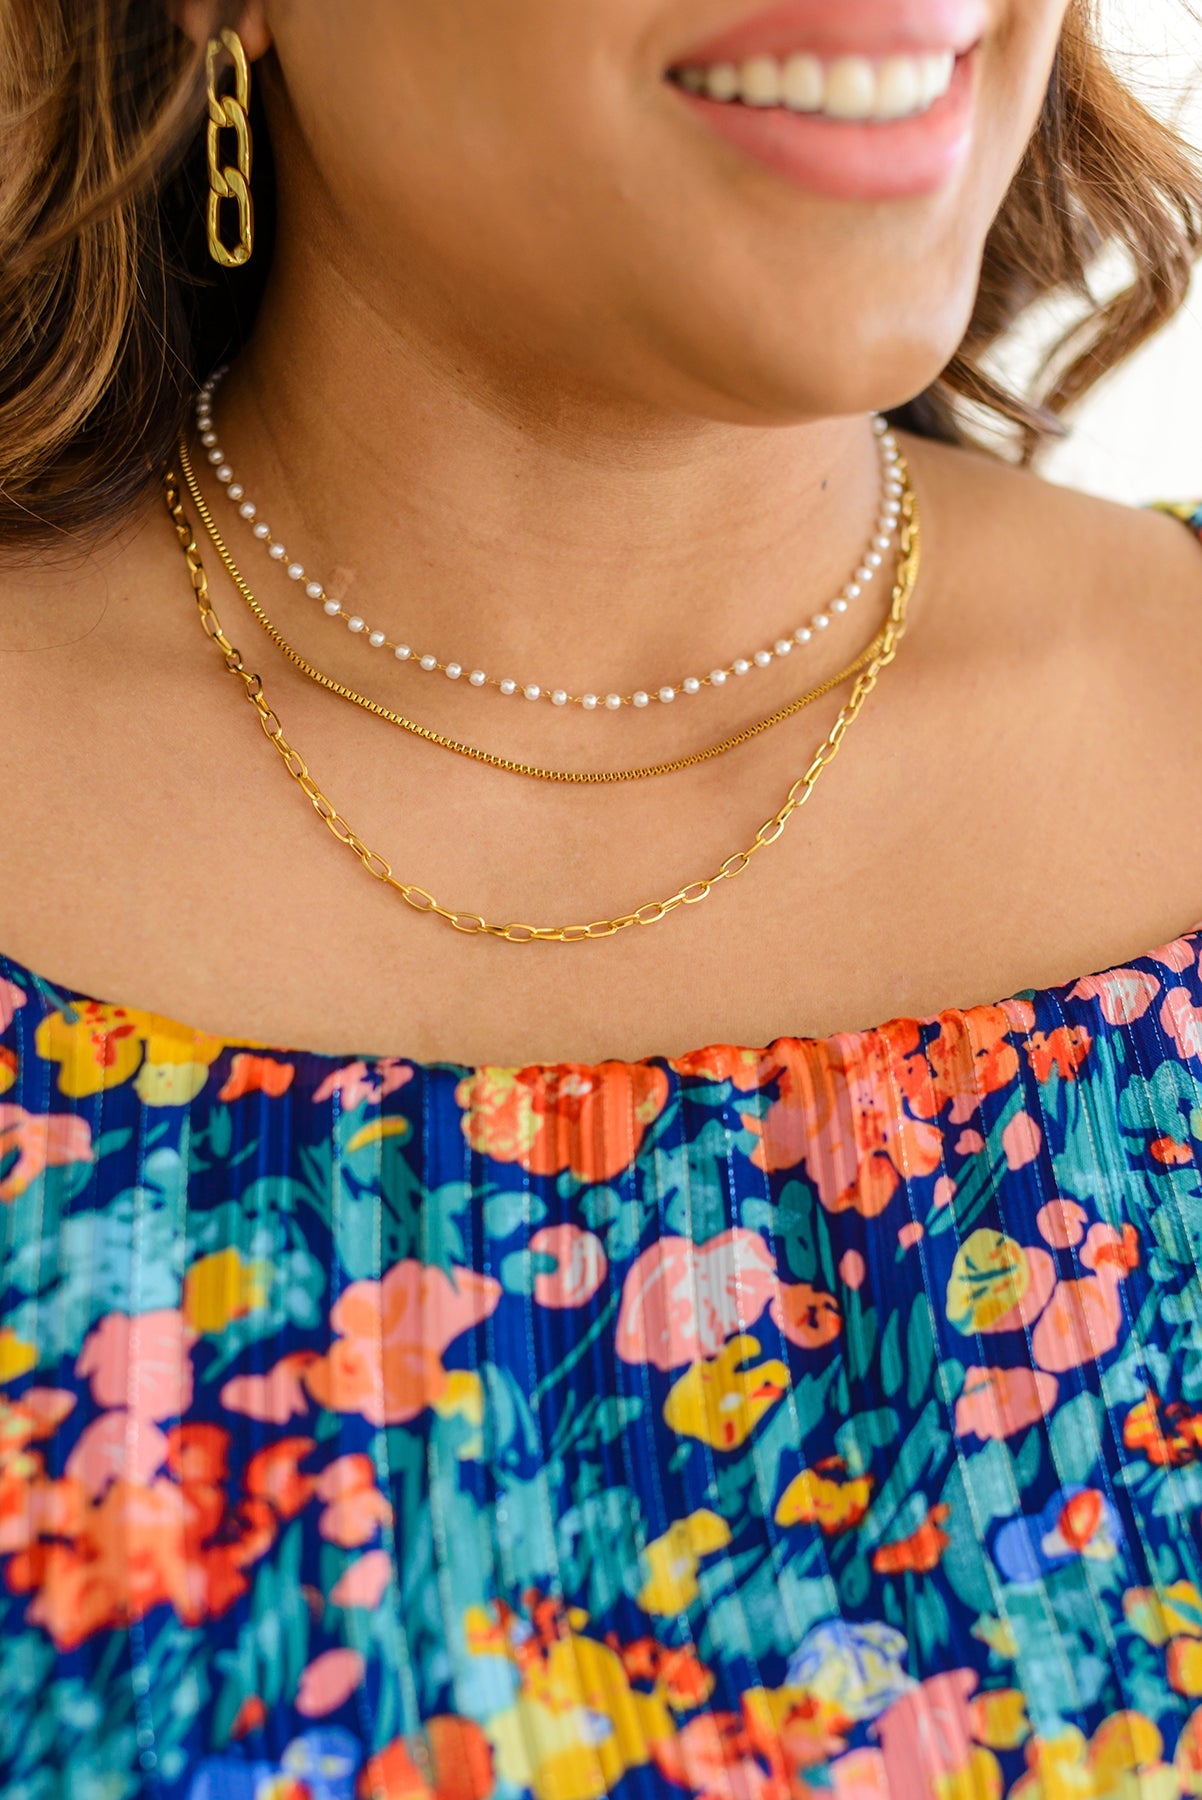 Triple Threat Layered Necklace - 2/20